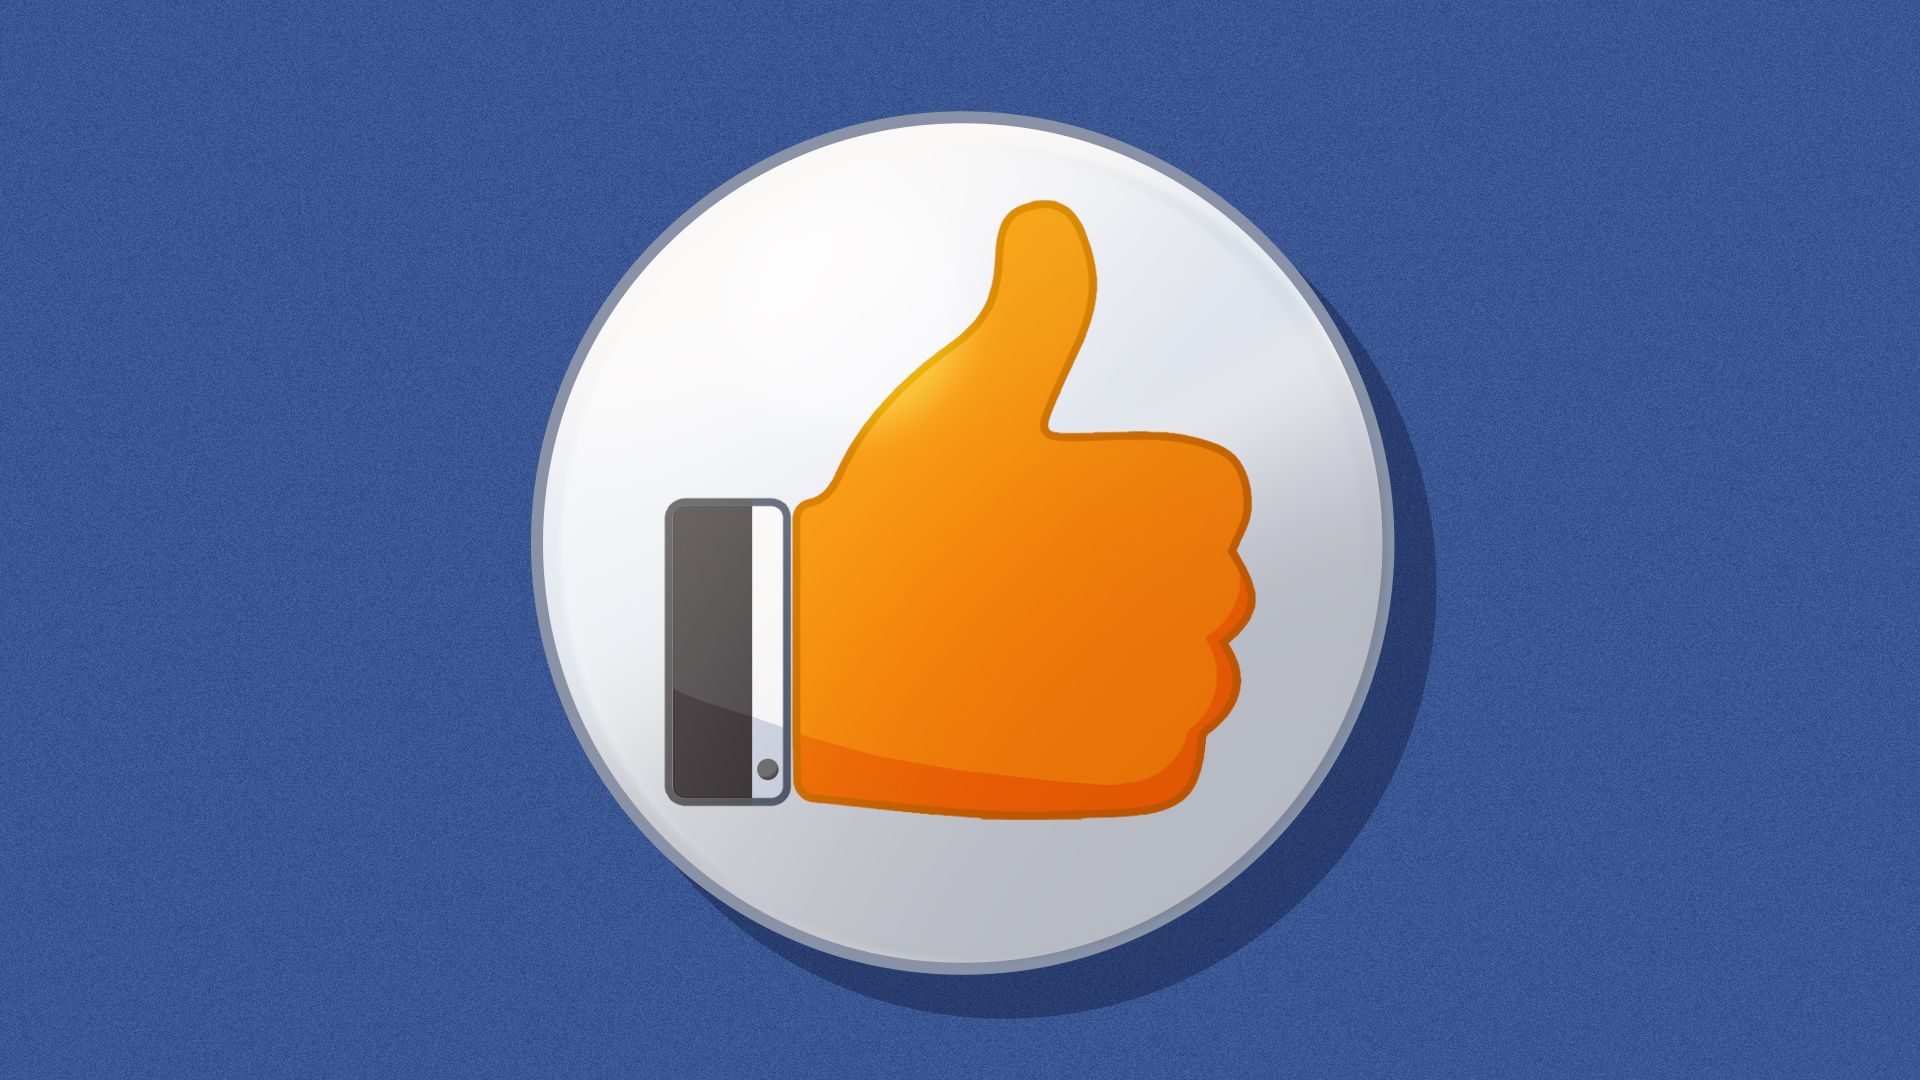 Illustration of a thumbs up "like" button resembling President Trump's hand